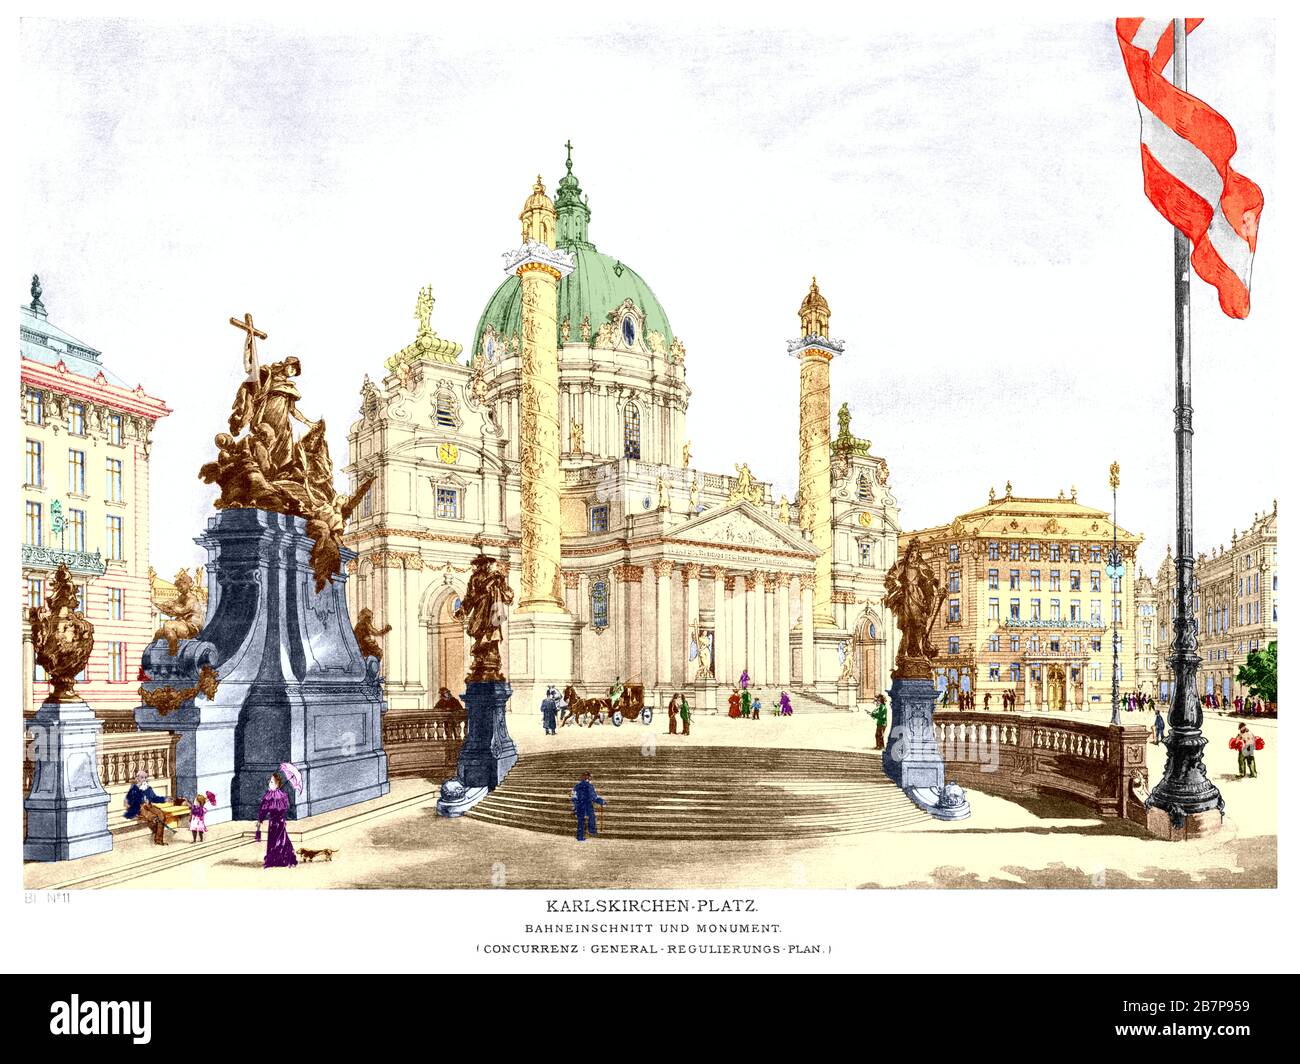 Austria, Wien, Project for Railway cutting and monument at Karlskirsche Platz, from sketches of projects by Otto Wagner Architectk 1897. Stock Photo